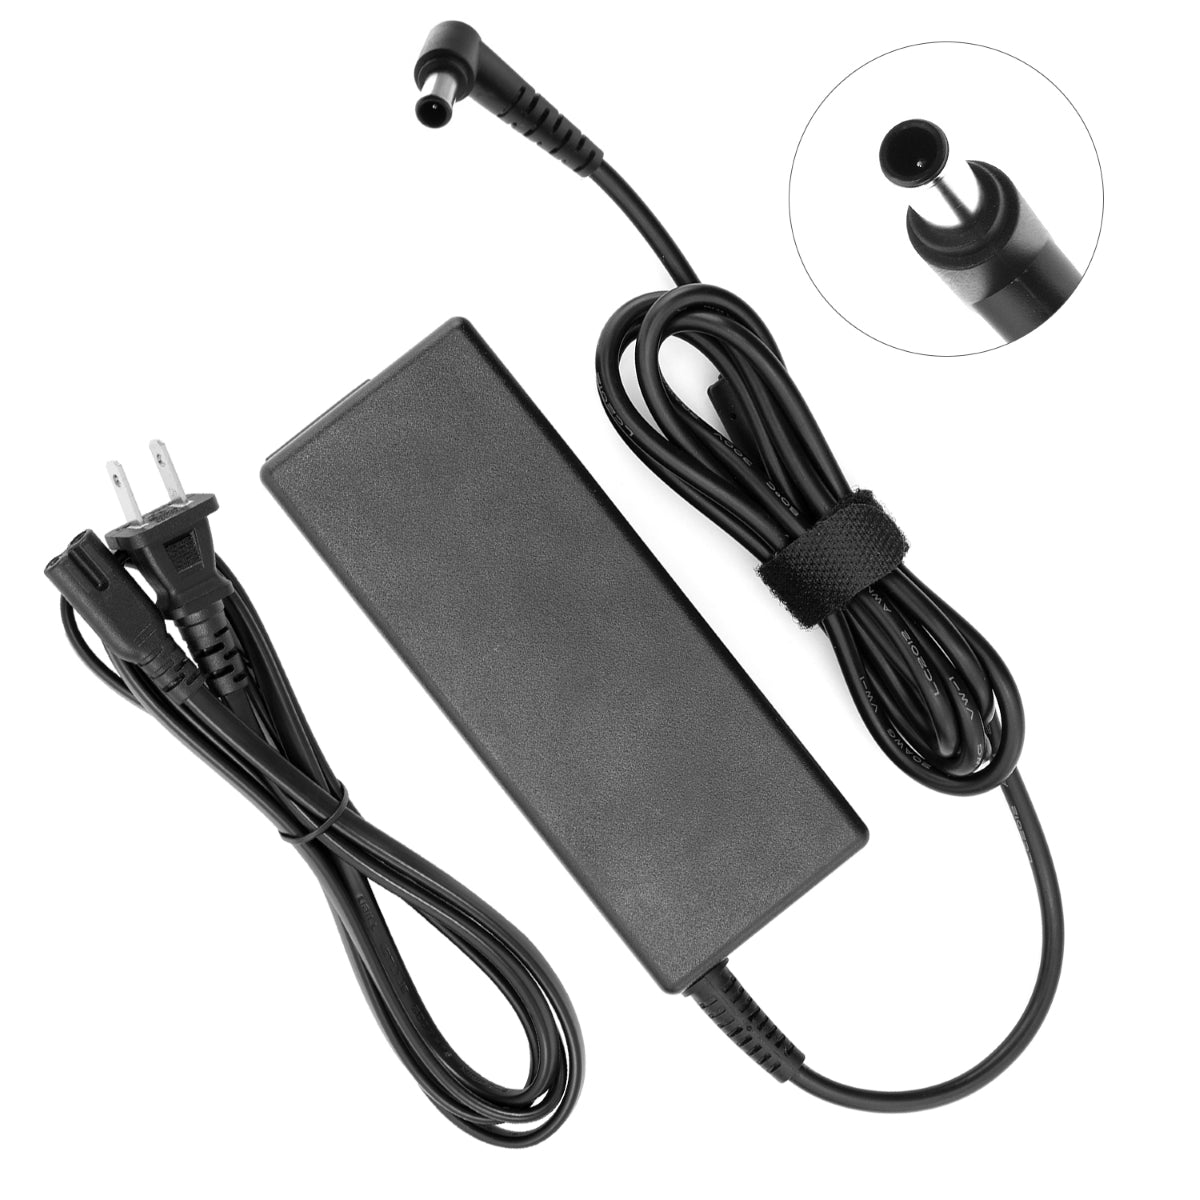 AC Adapter Power Supply for Samsung 27-inch C27F591 LED Monitor Display